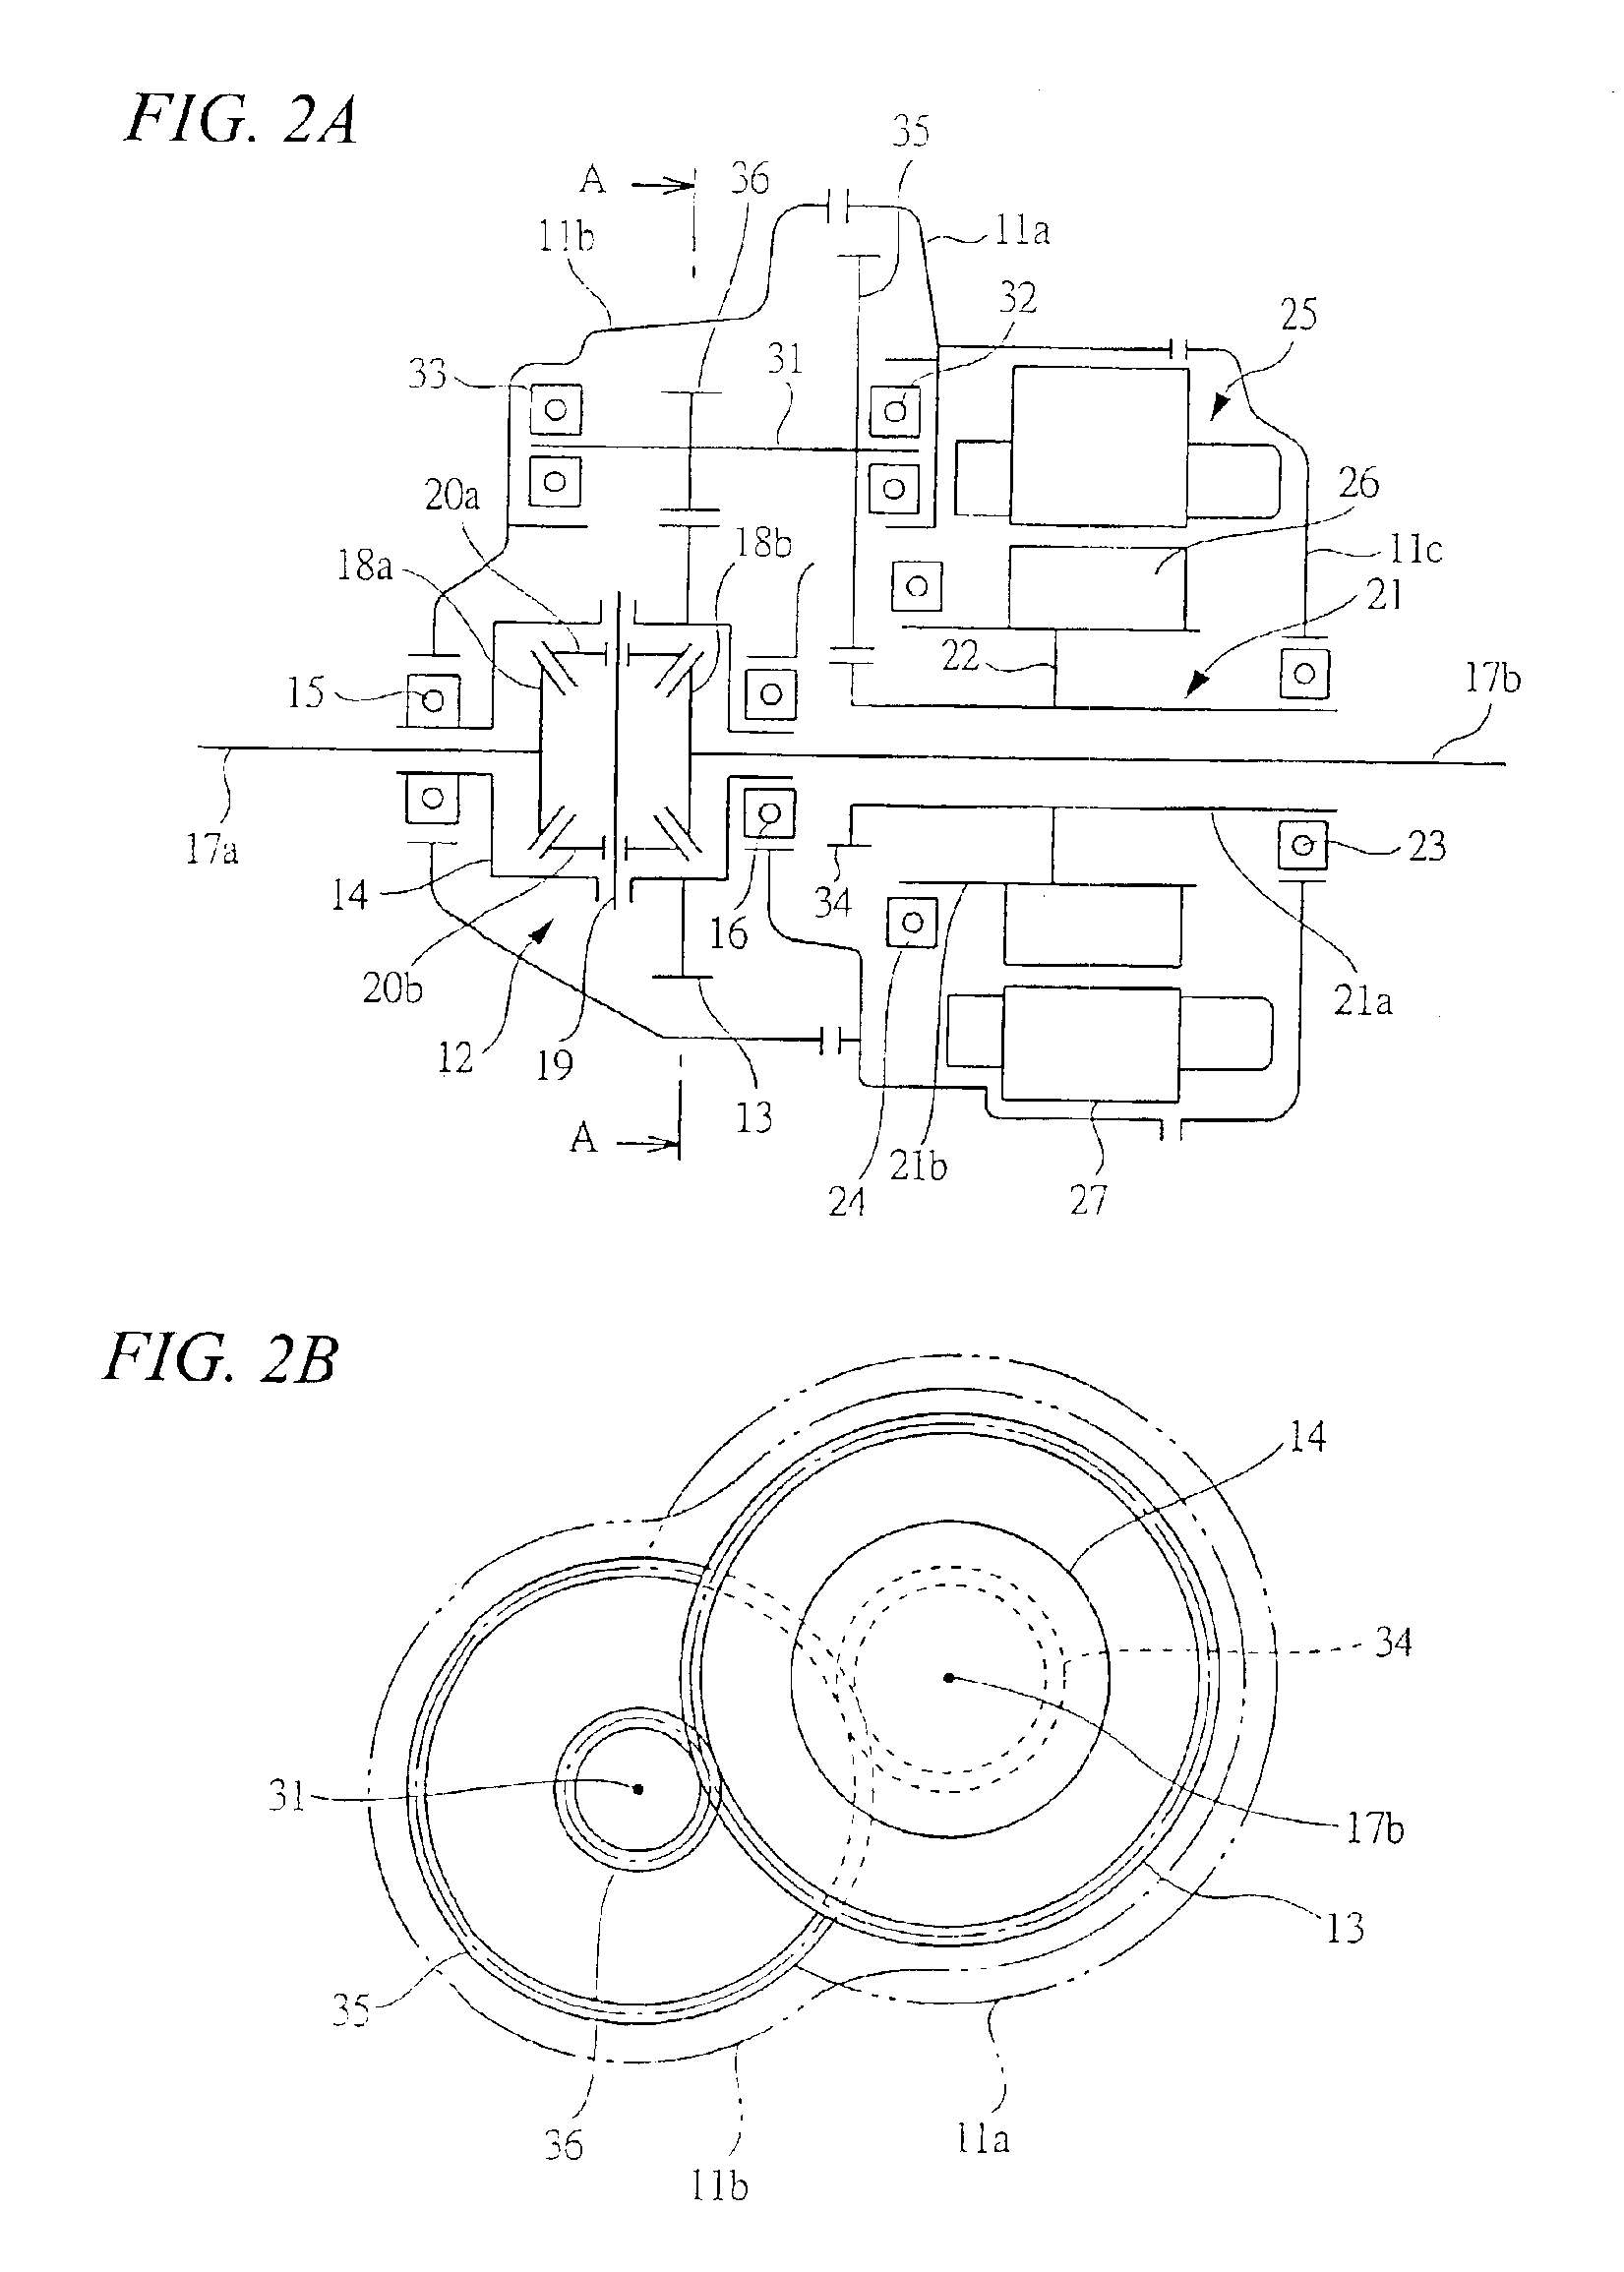 Driving apparatus for vehicle